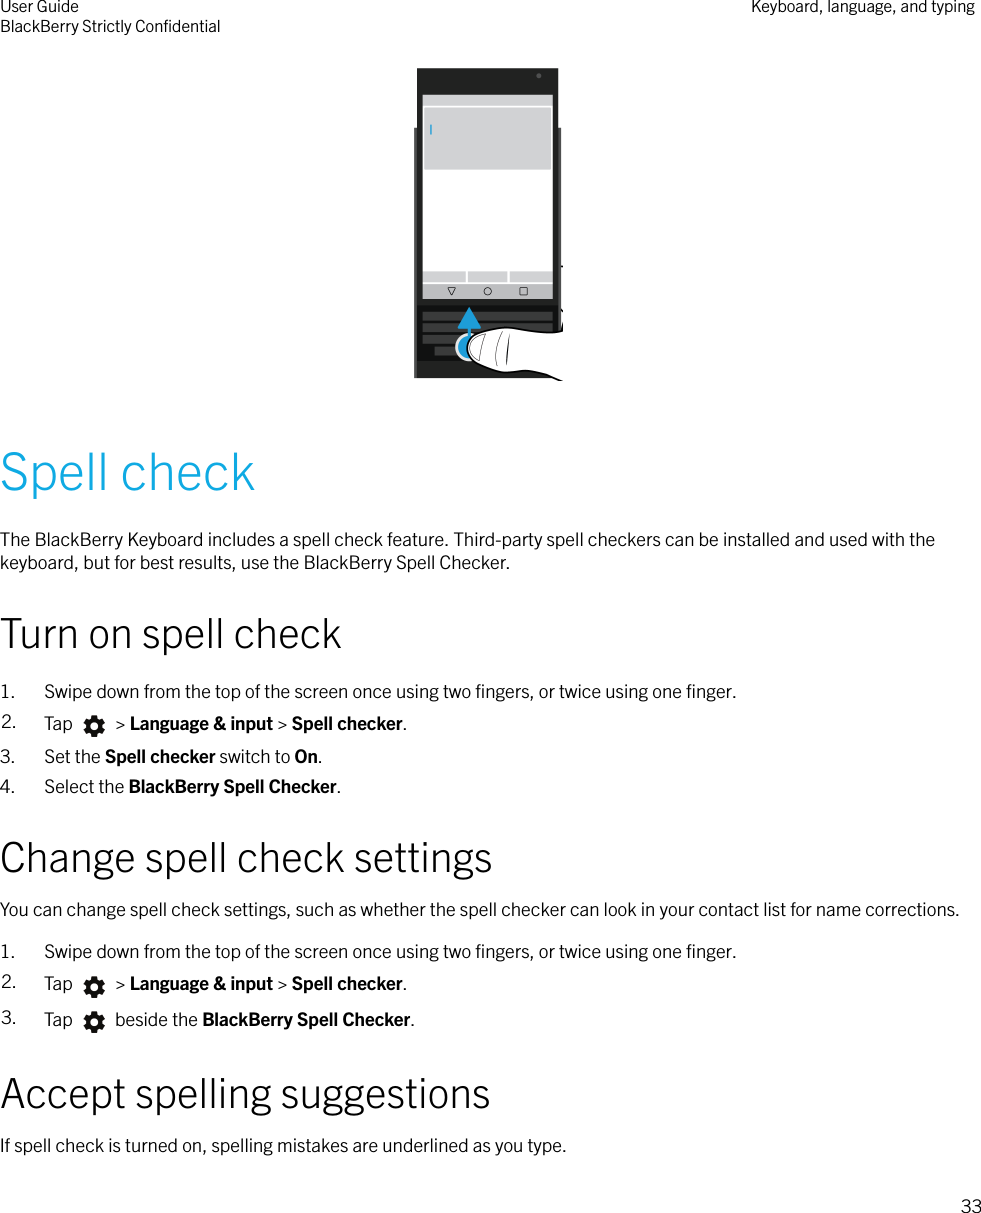  Spell checkThe BlackBerry Keyboard includes a spell check feature. Third-party spell checkers can be installed and used with thekeyboard, but for best results, use the BlackBerry Spell Checker.Turn on spell check1. Swipe down from the top of the screen once using two ﬁngers, or twice using one ﬁnger.2. Tap   &gt; Language &amp; input &gt; Spell checker.3. Set the Spell checker switch to On.4. Select the BlackBerry Spell Checker.Change spell check settingsYou can change spell check settings, such as whether the spell checker can look in your contact list for name corrections.1. Swipe down from the top of the screen once using two ﬁngers, or twice using one ﬁnger.2. Tap   &gt; Language &amp; input &gt; Spell checker.3. Tap   beside the BlackBerry Spell Checker.Accept spelling suggestionsIf spell check is turned on, spelling mistakes are underlined as you type.User GuideBlackBerry Strictly ConﬁdentialKeyboard, language, and typing33